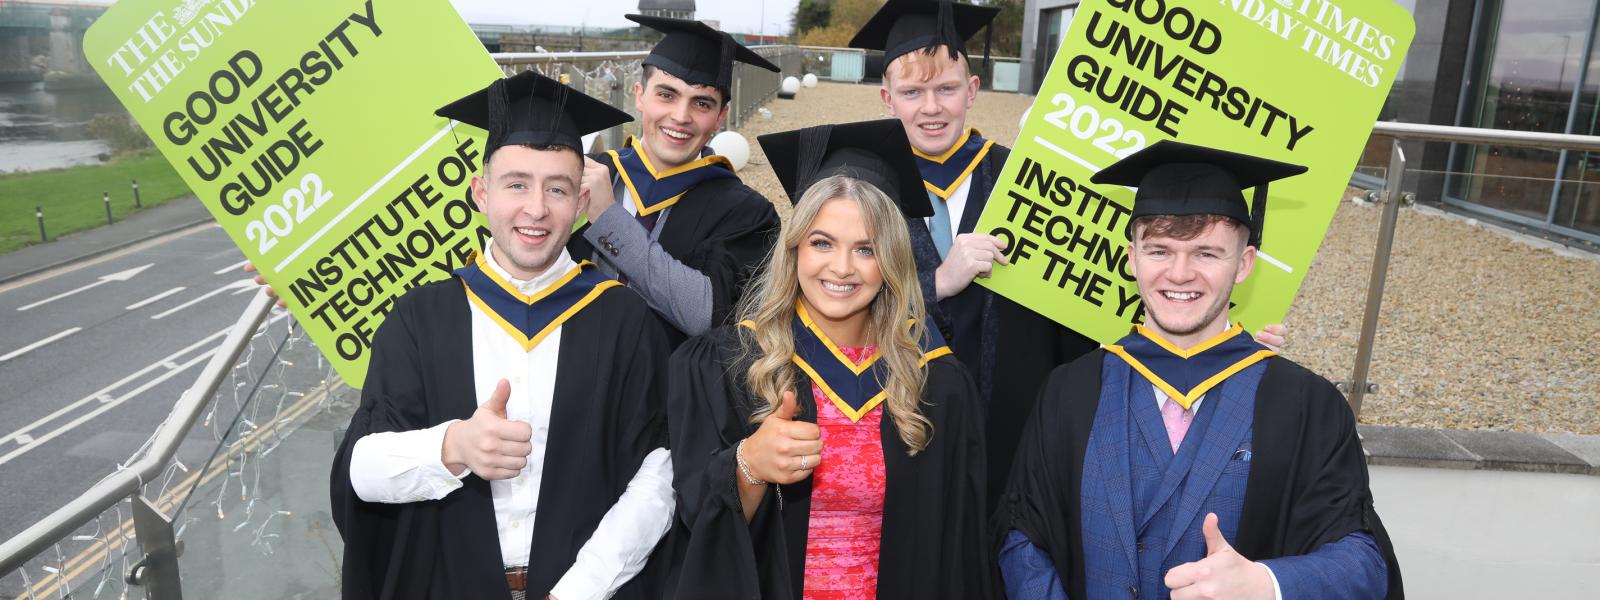 GMIT Galway students at Graduation